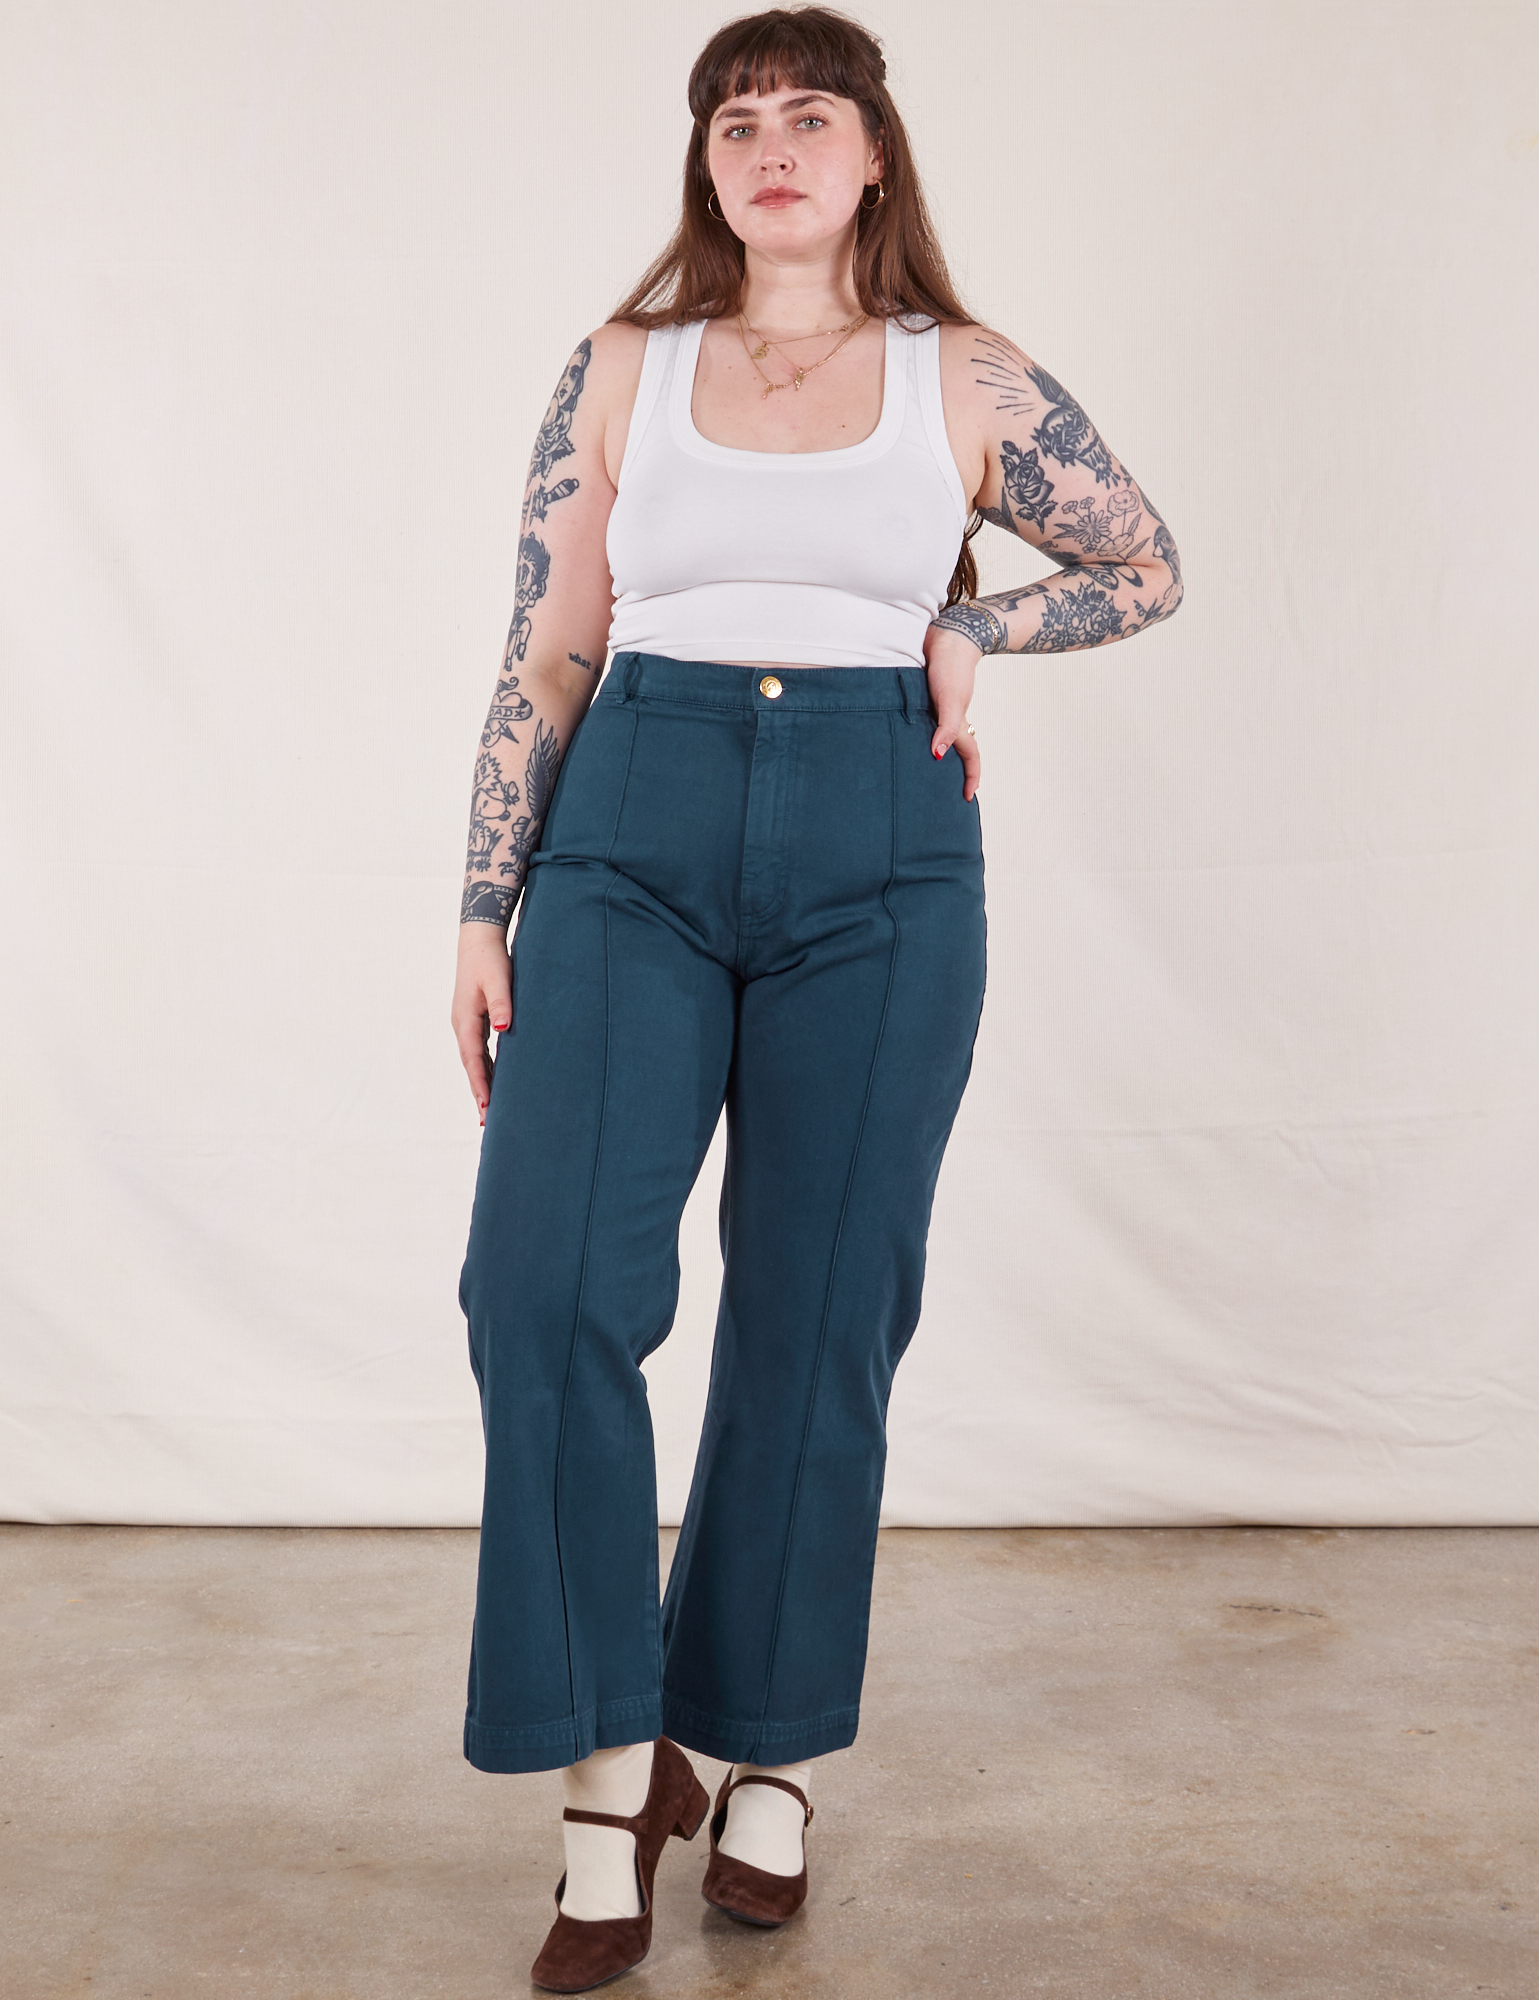 Sydney is 5&#39;9&quot; and wearing L Western Pants in Lagoon paired with vintage tee off-white Cropped Tank